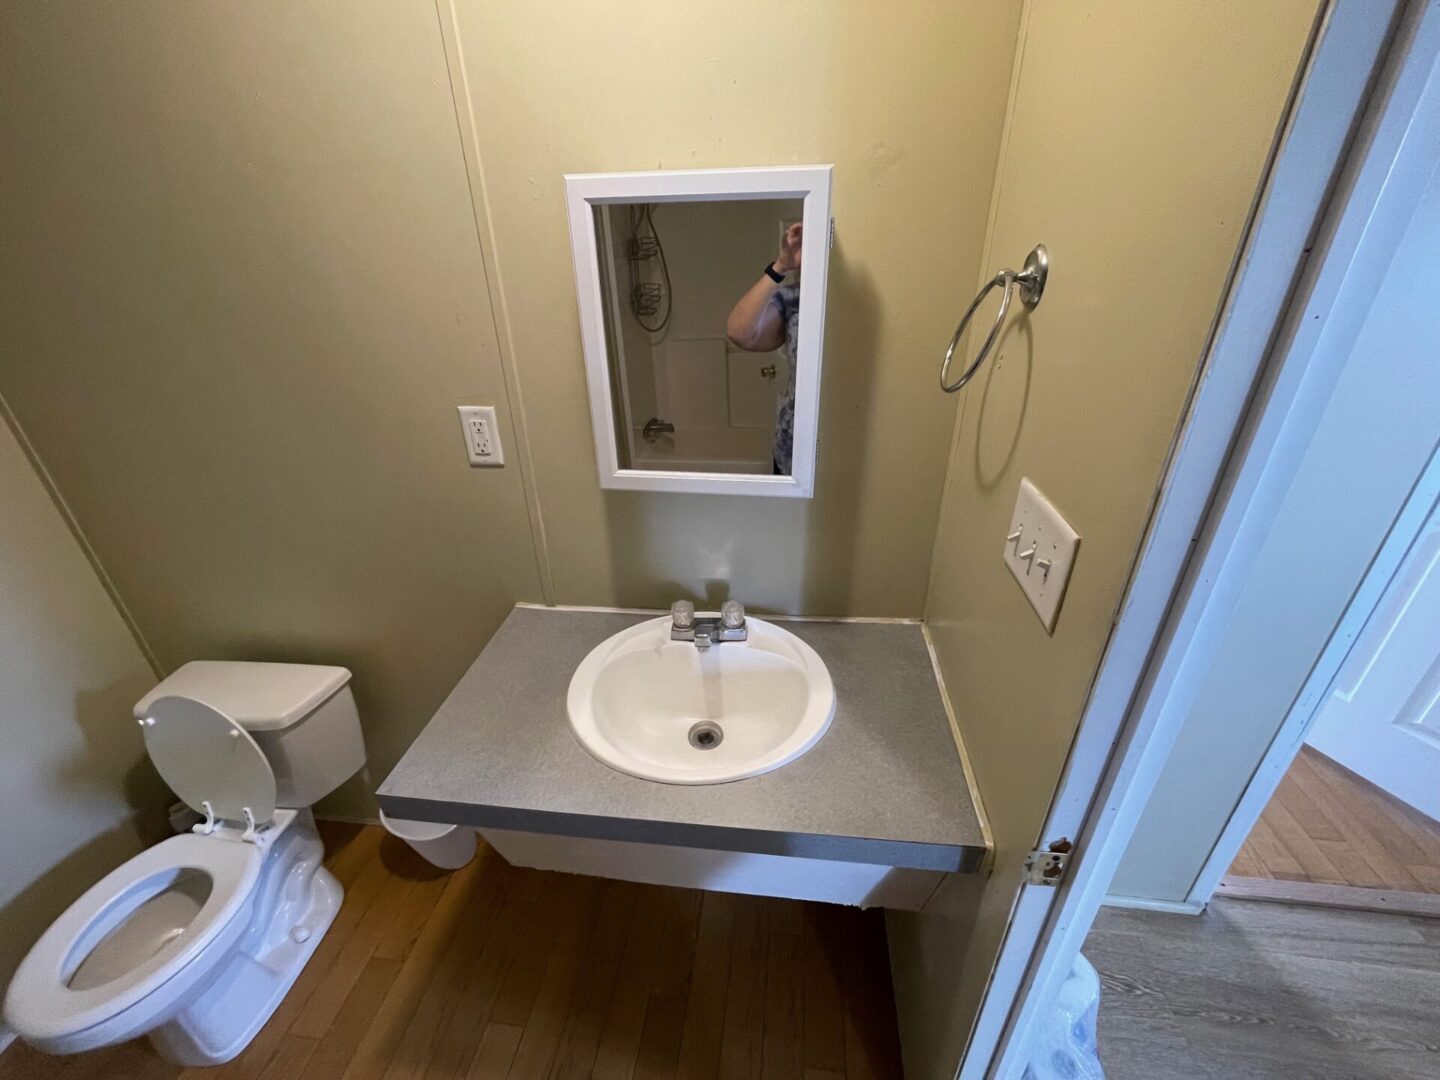 Bathroom with toilet, sink, and mirror.